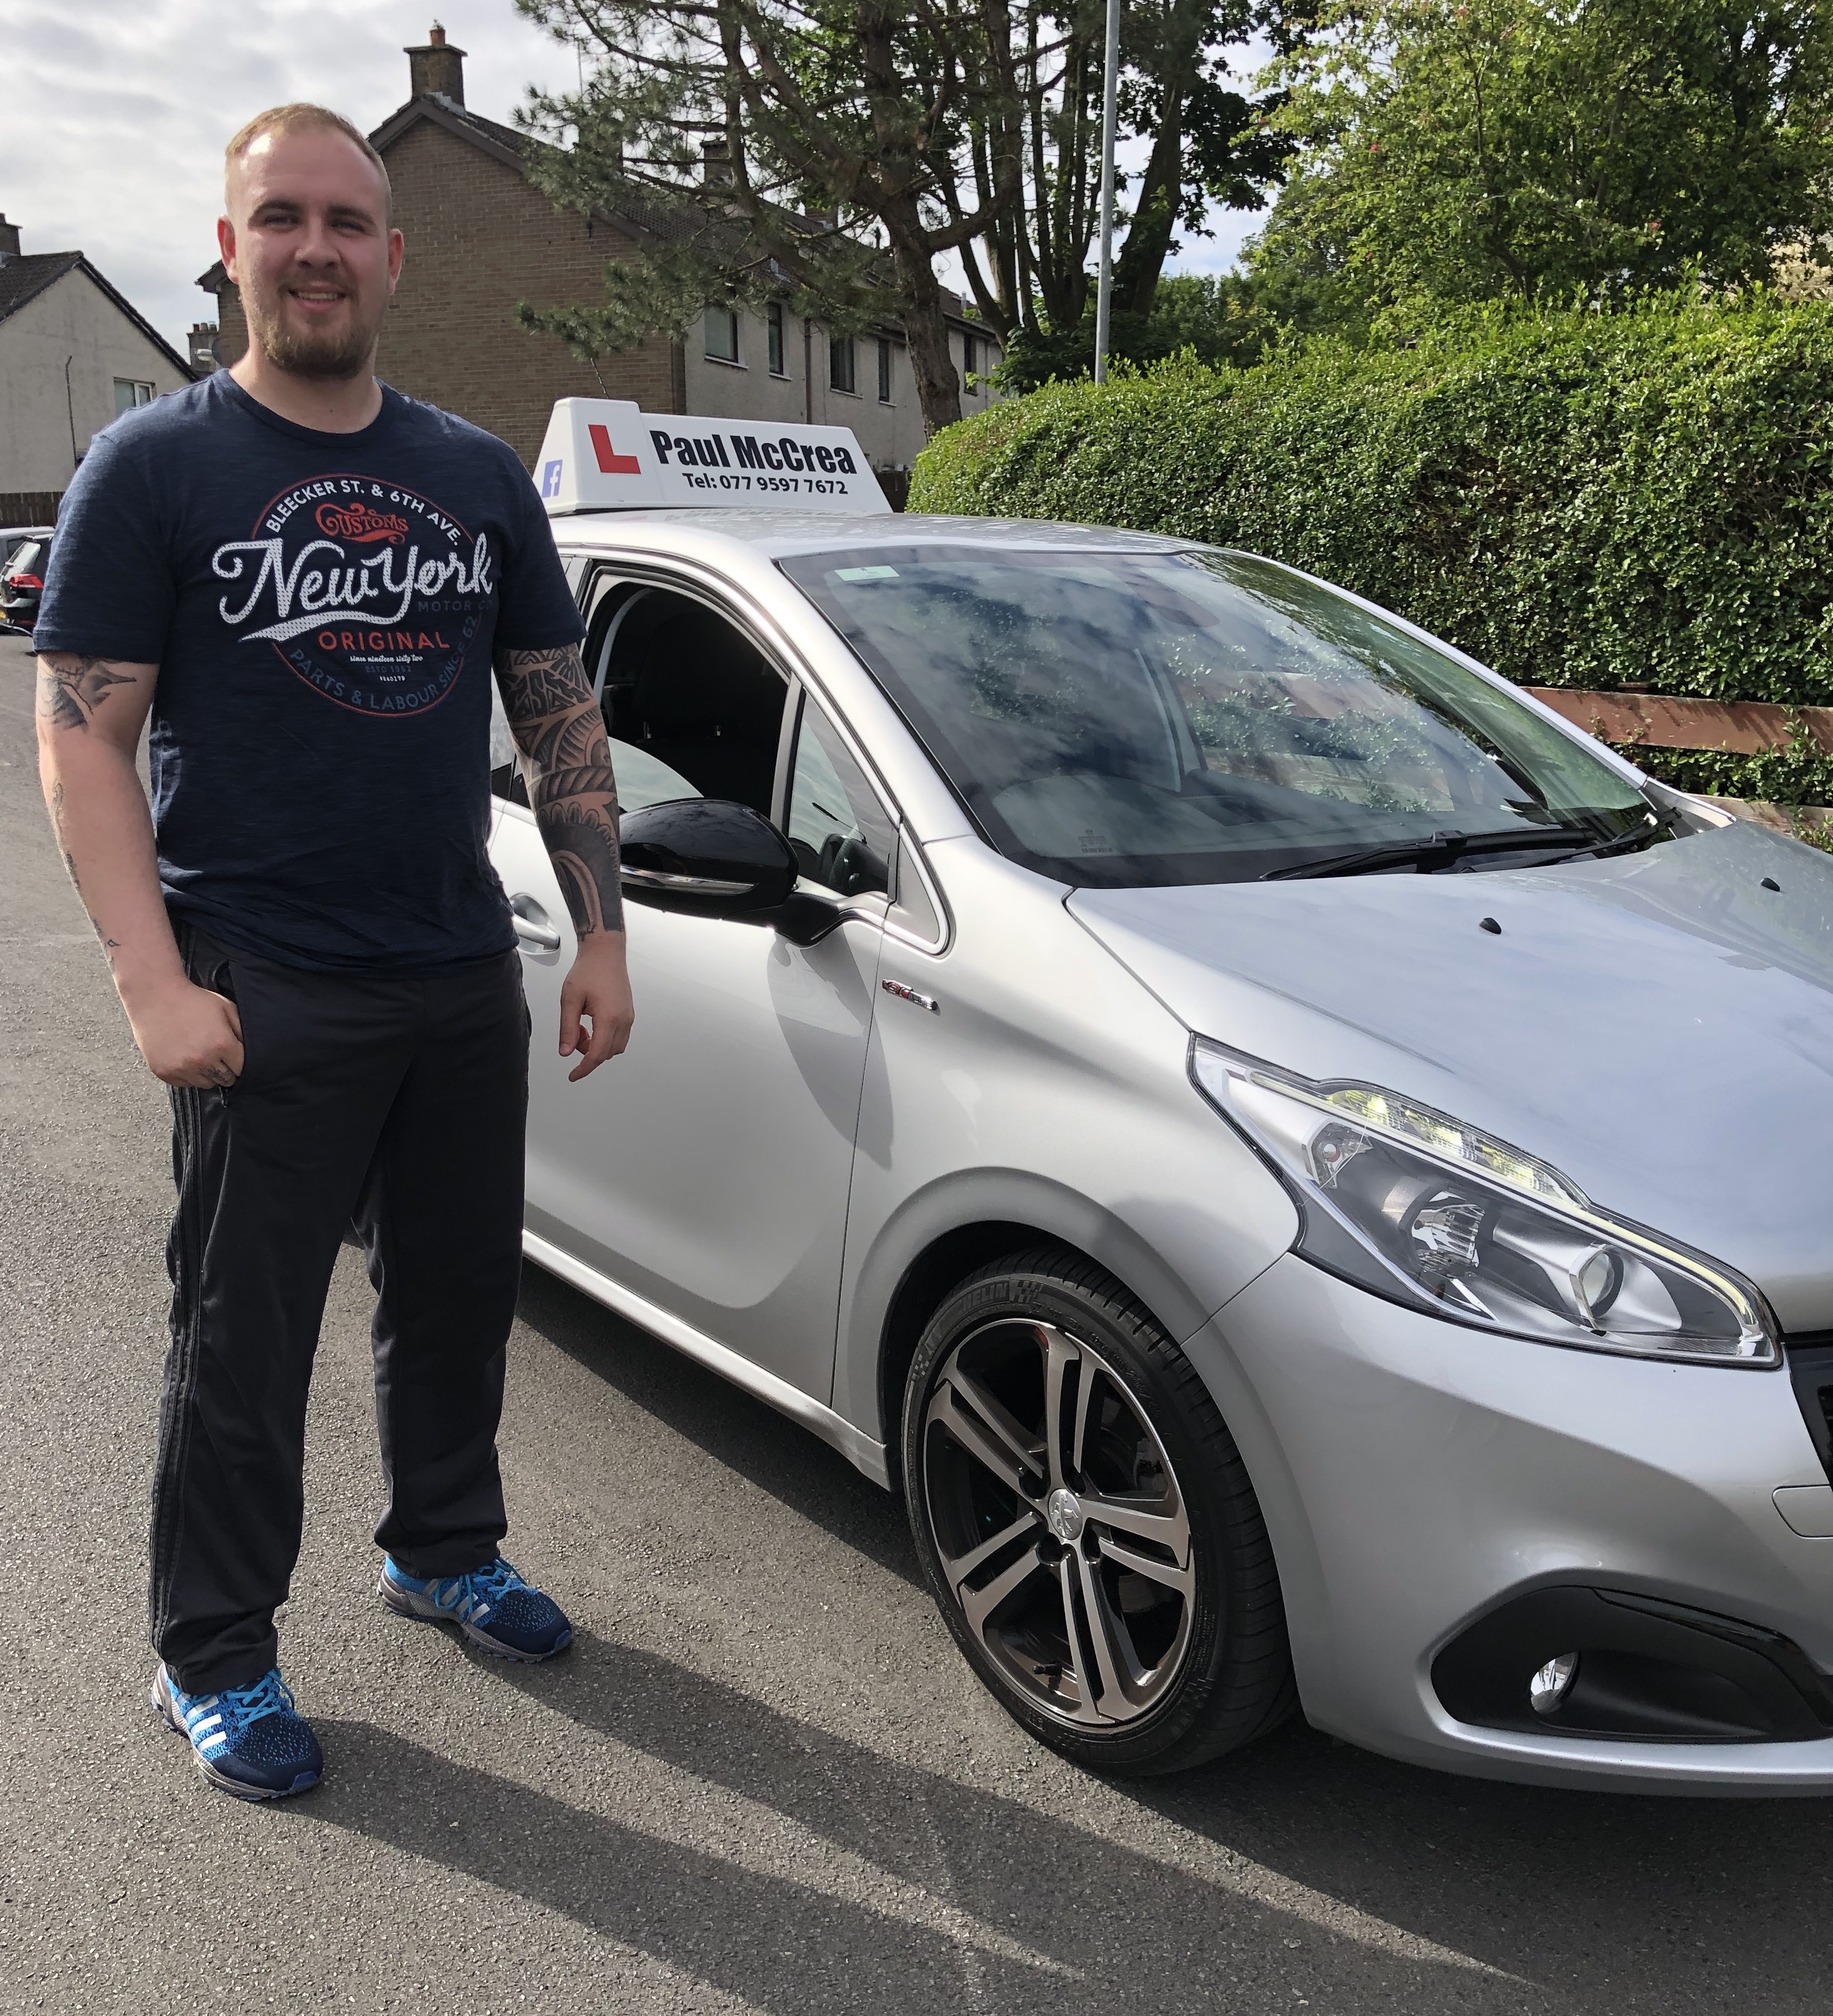 Paul McCrea Driving Instructor Passing Students